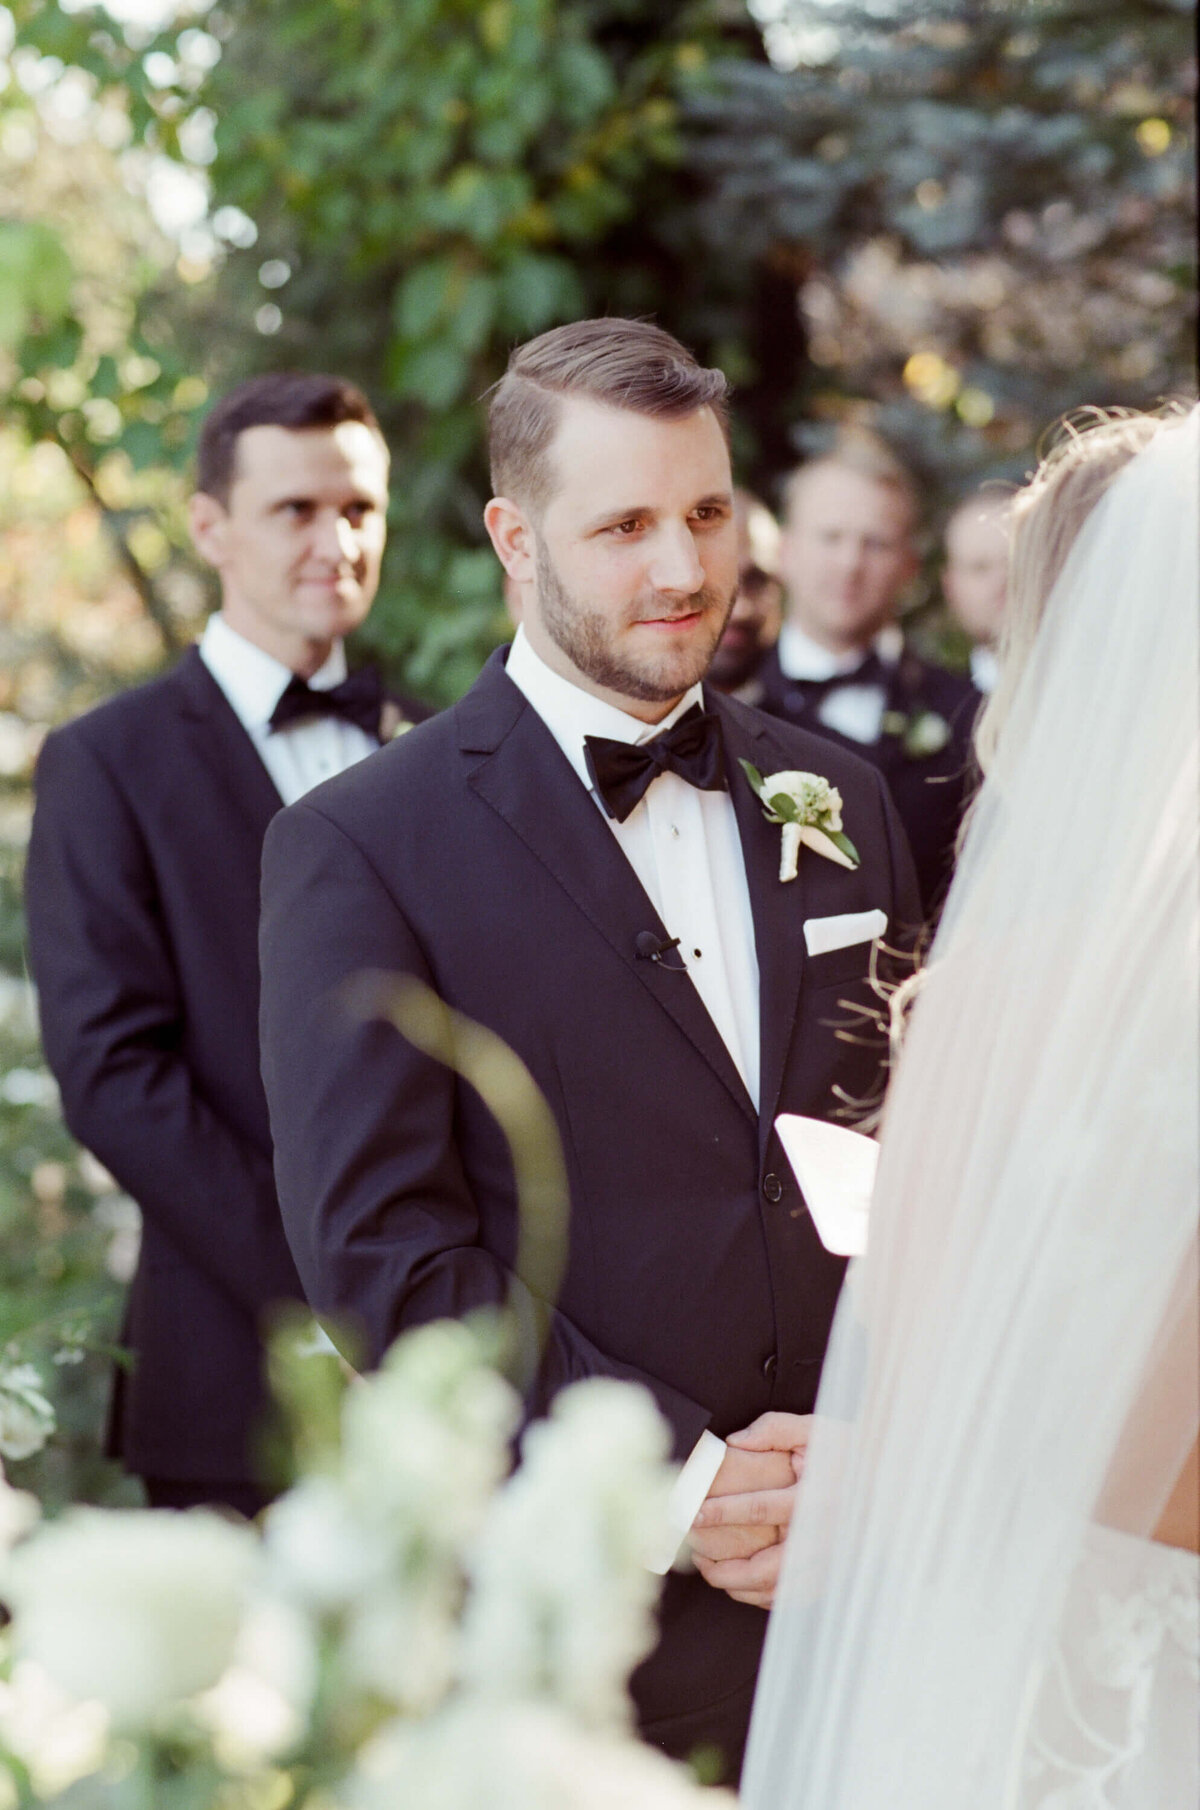 Bridegroom in elegant black suit and bow tie looks at his spouse while his best men attend the outdoor vineyard wedding.